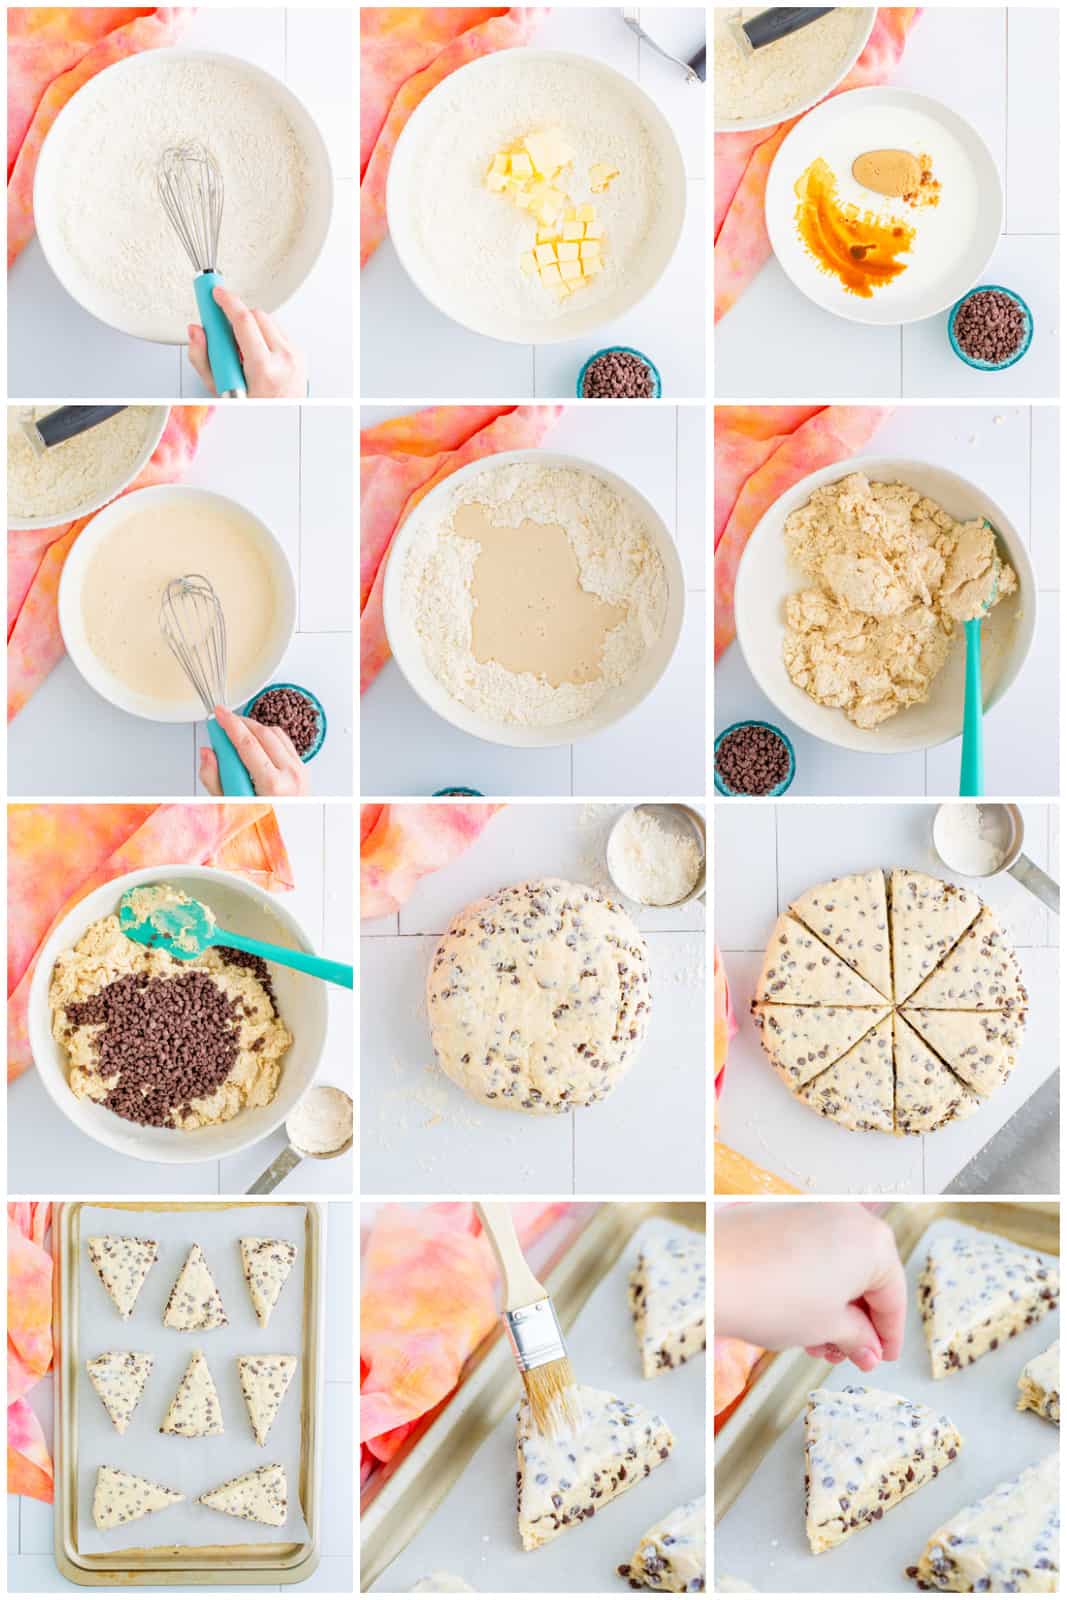 Step by step photos on how to make Chocolate Chip Scones.